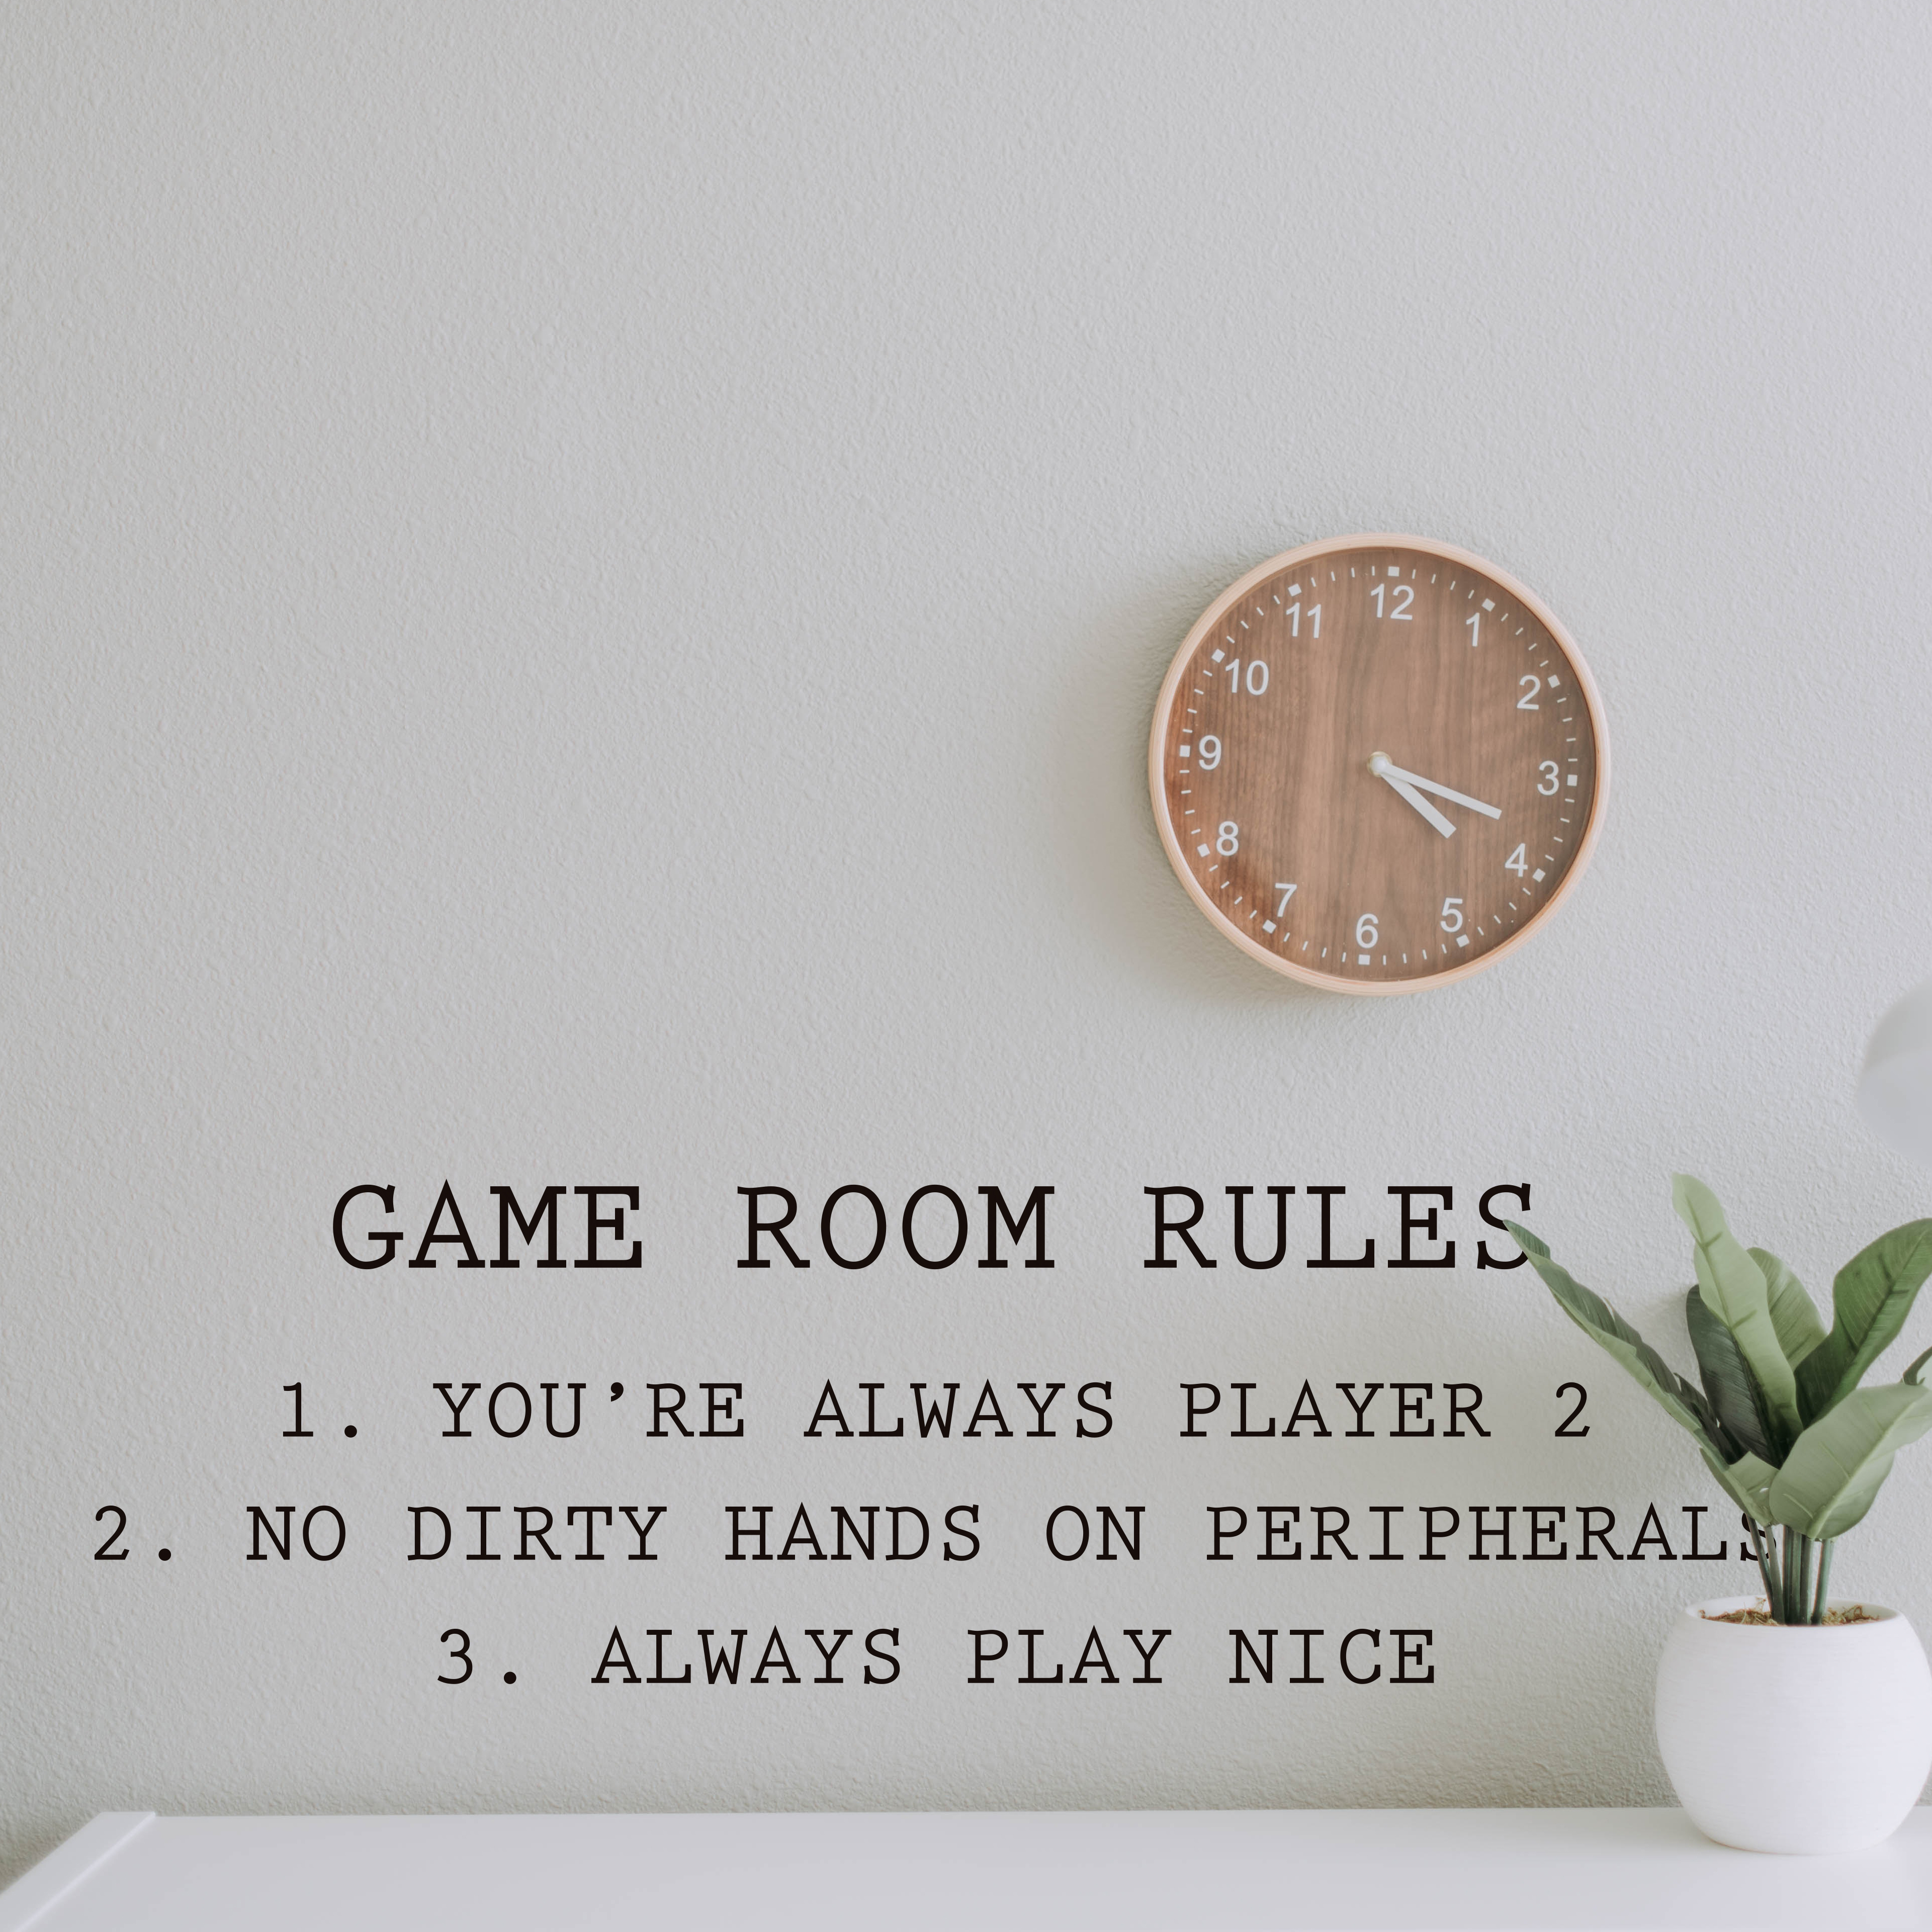 My room rules make a poster write. Room Rules 6 класс. My Room Rules 6 класс Постер. Плакат my Room Rules 6 класс. Bedroom Rules 6 класс.